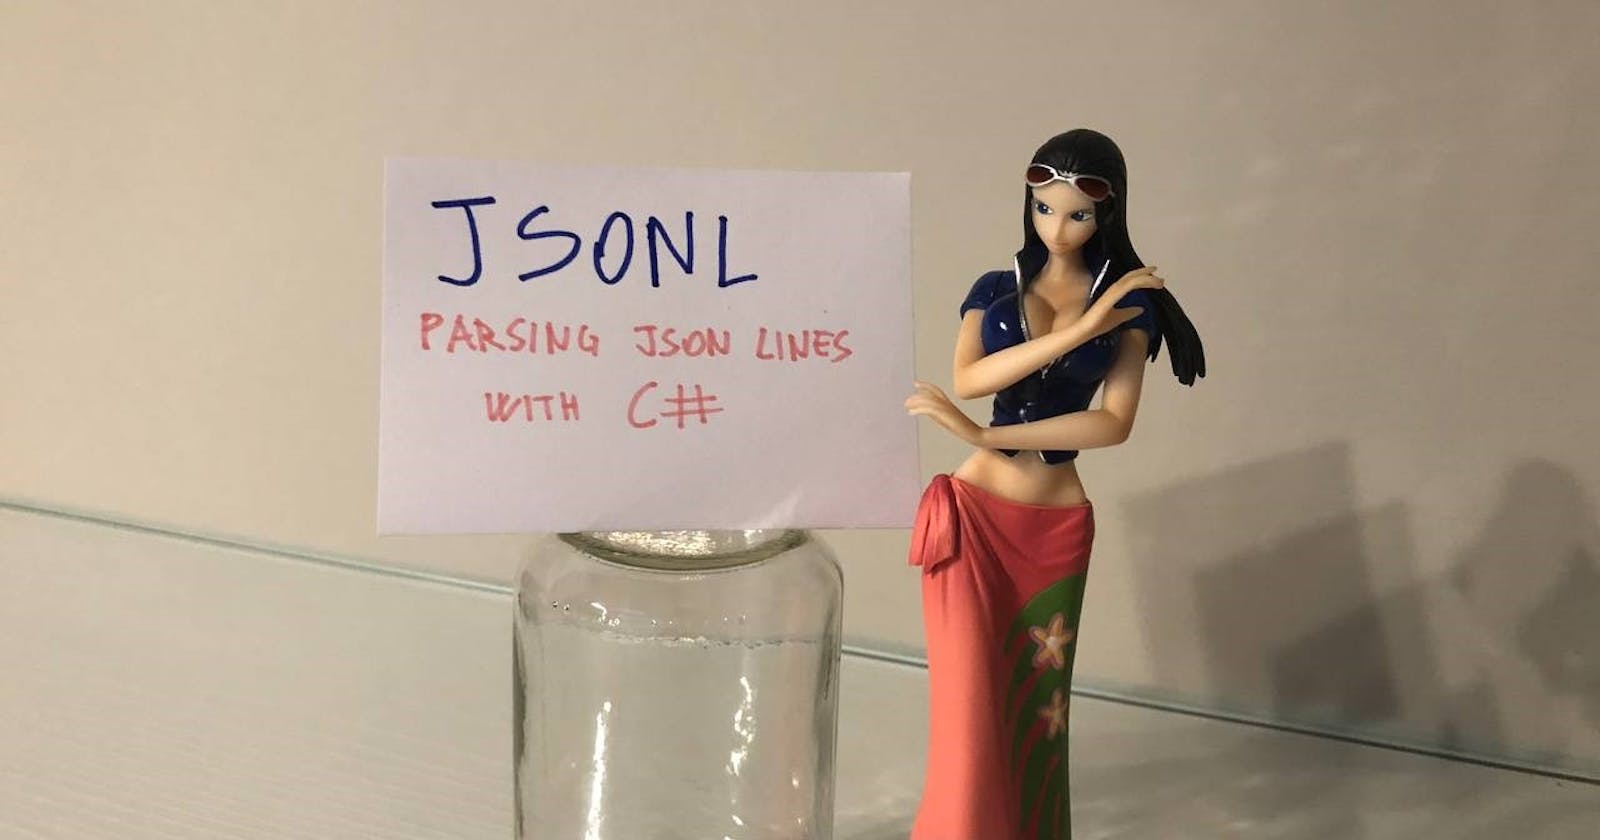 How to parse JSON Lines (JSONL) with C#